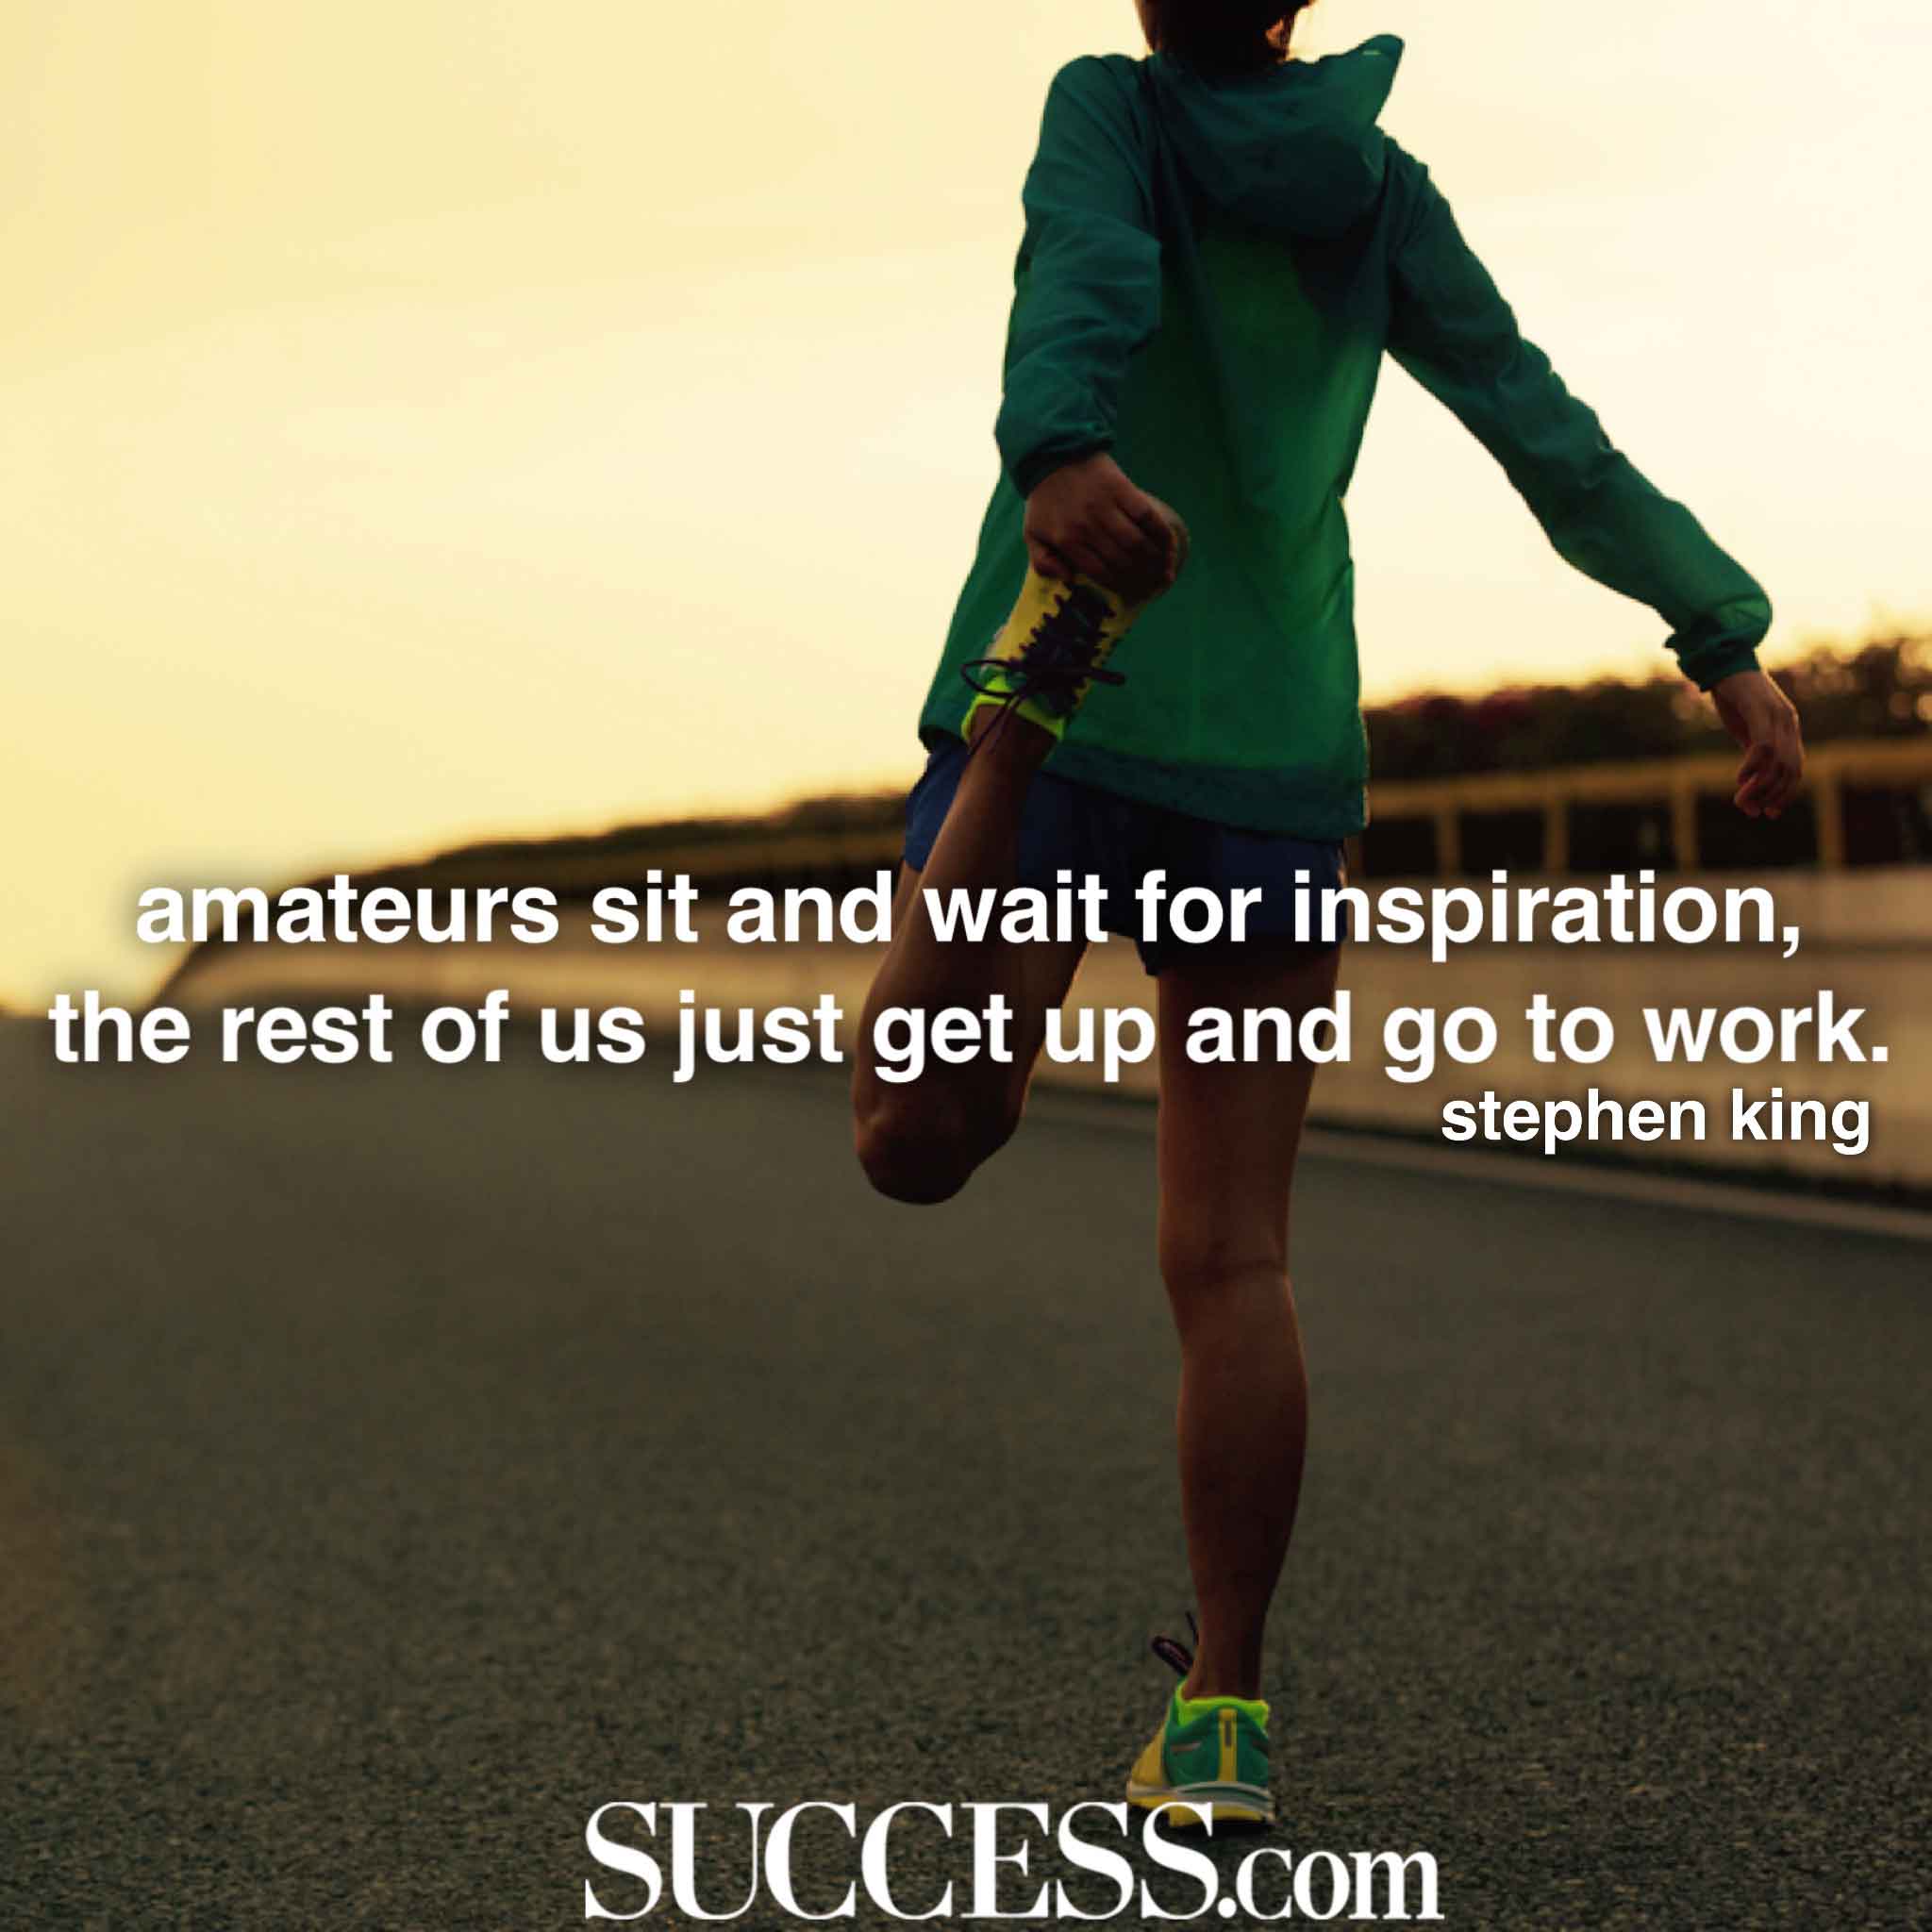 “Amateurs sit and wait for inspiration the rest of us just get up and go to work.” —Stephen King-hoogbegaafd